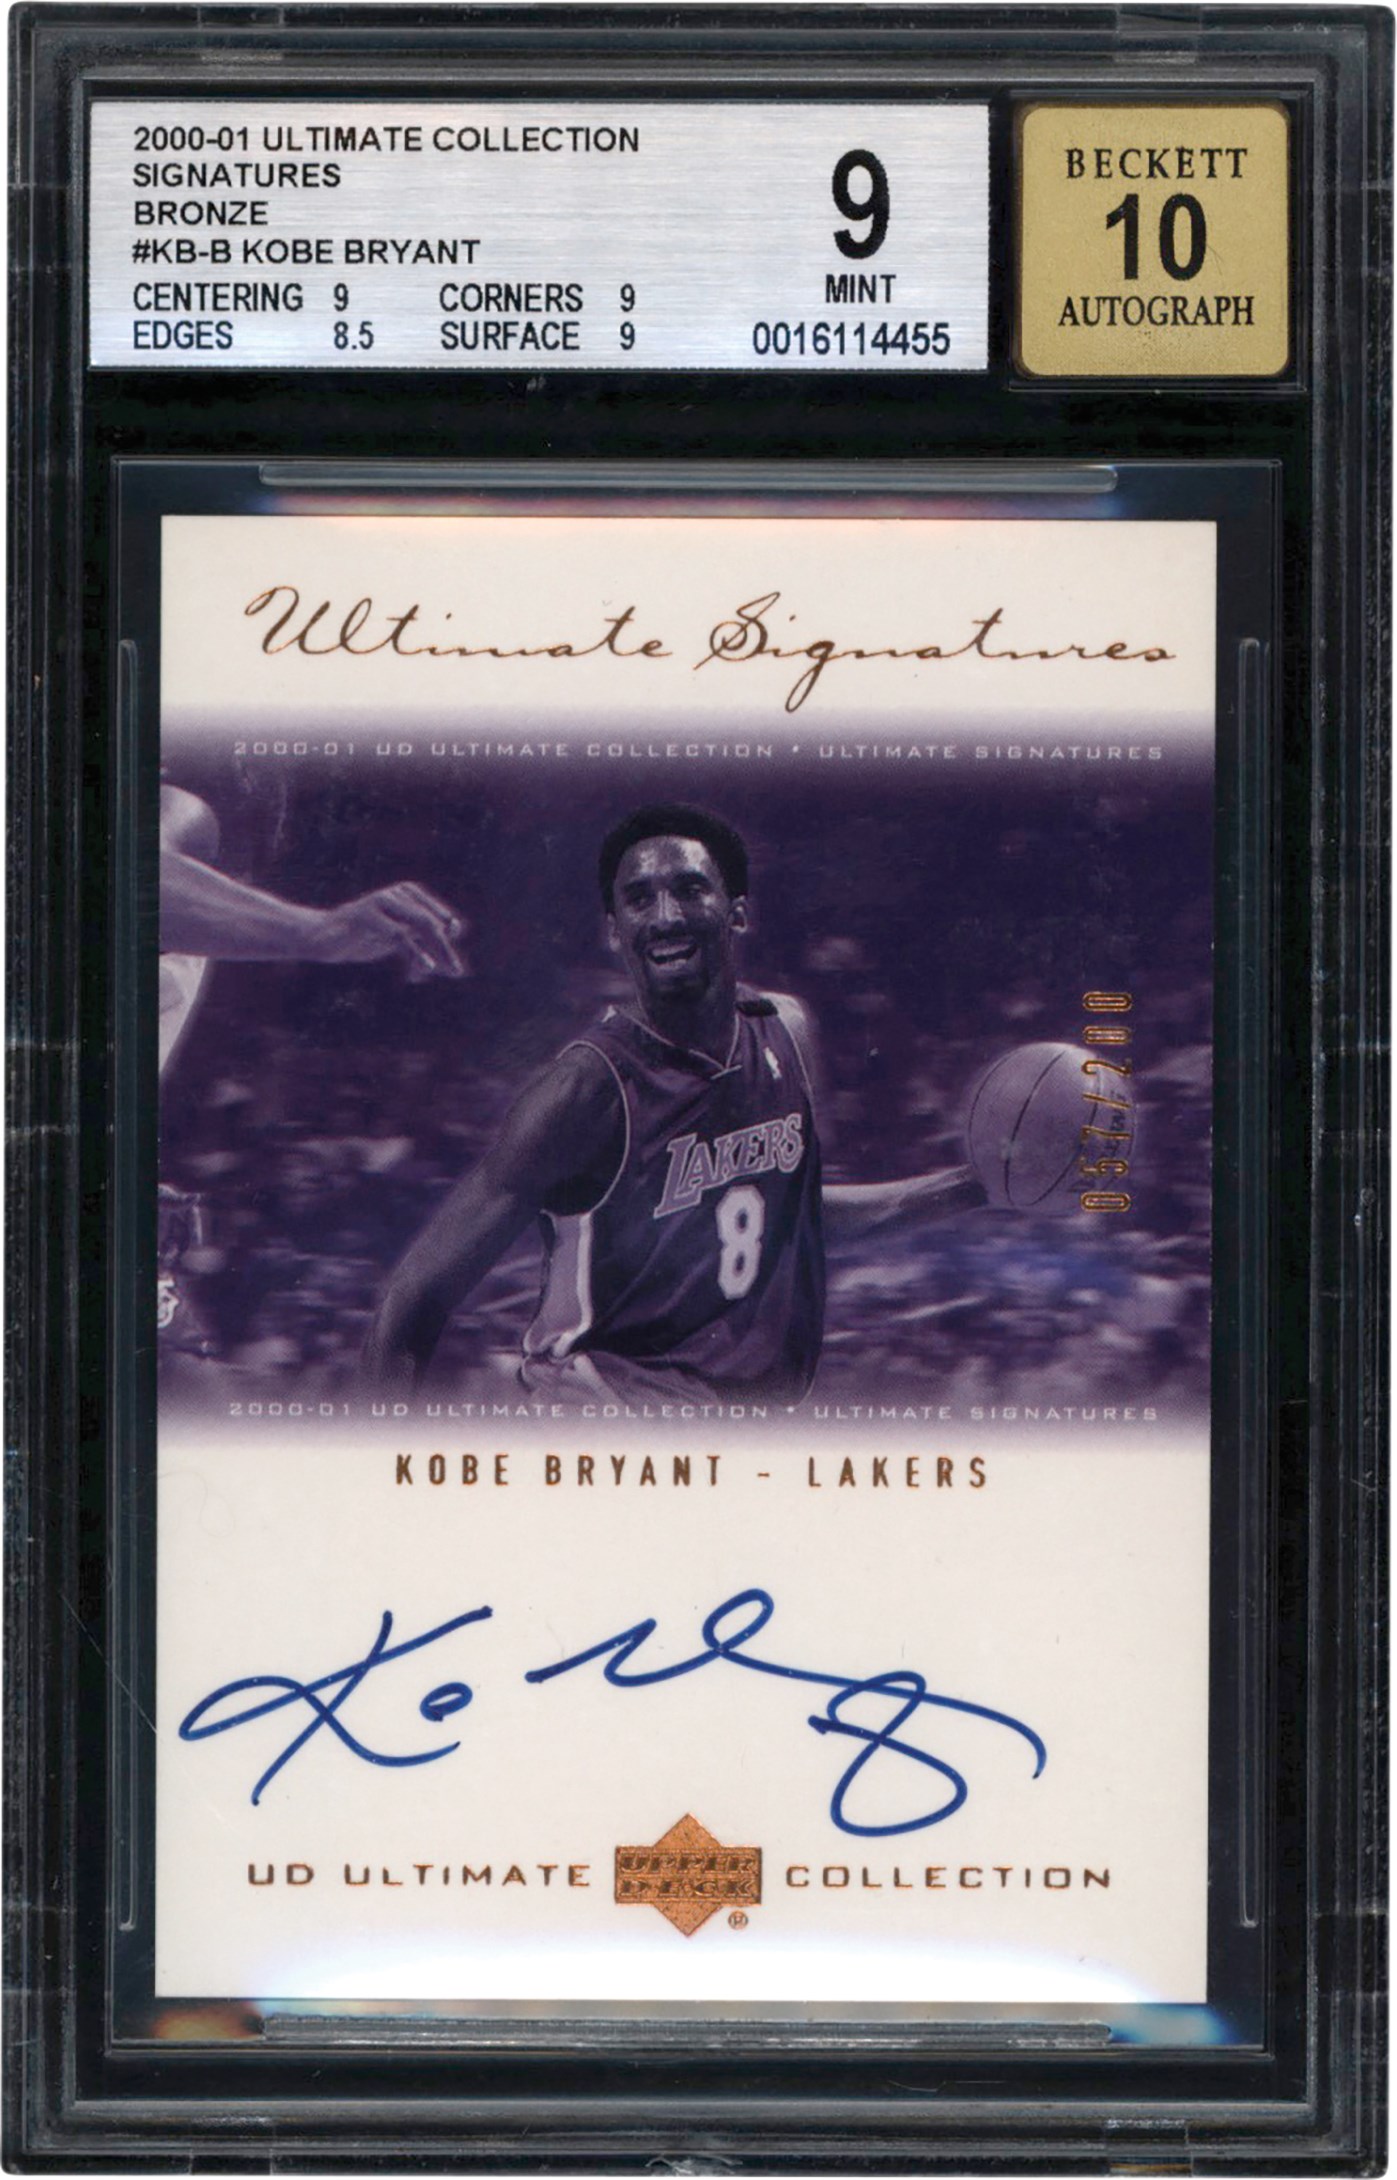 Basketball Cards - 2000-2001 Ultimate Collection Basketball Signatures Bronze #KB-B Kobe Bryant Autograph #57/200 BGS MT 9 Auto 10